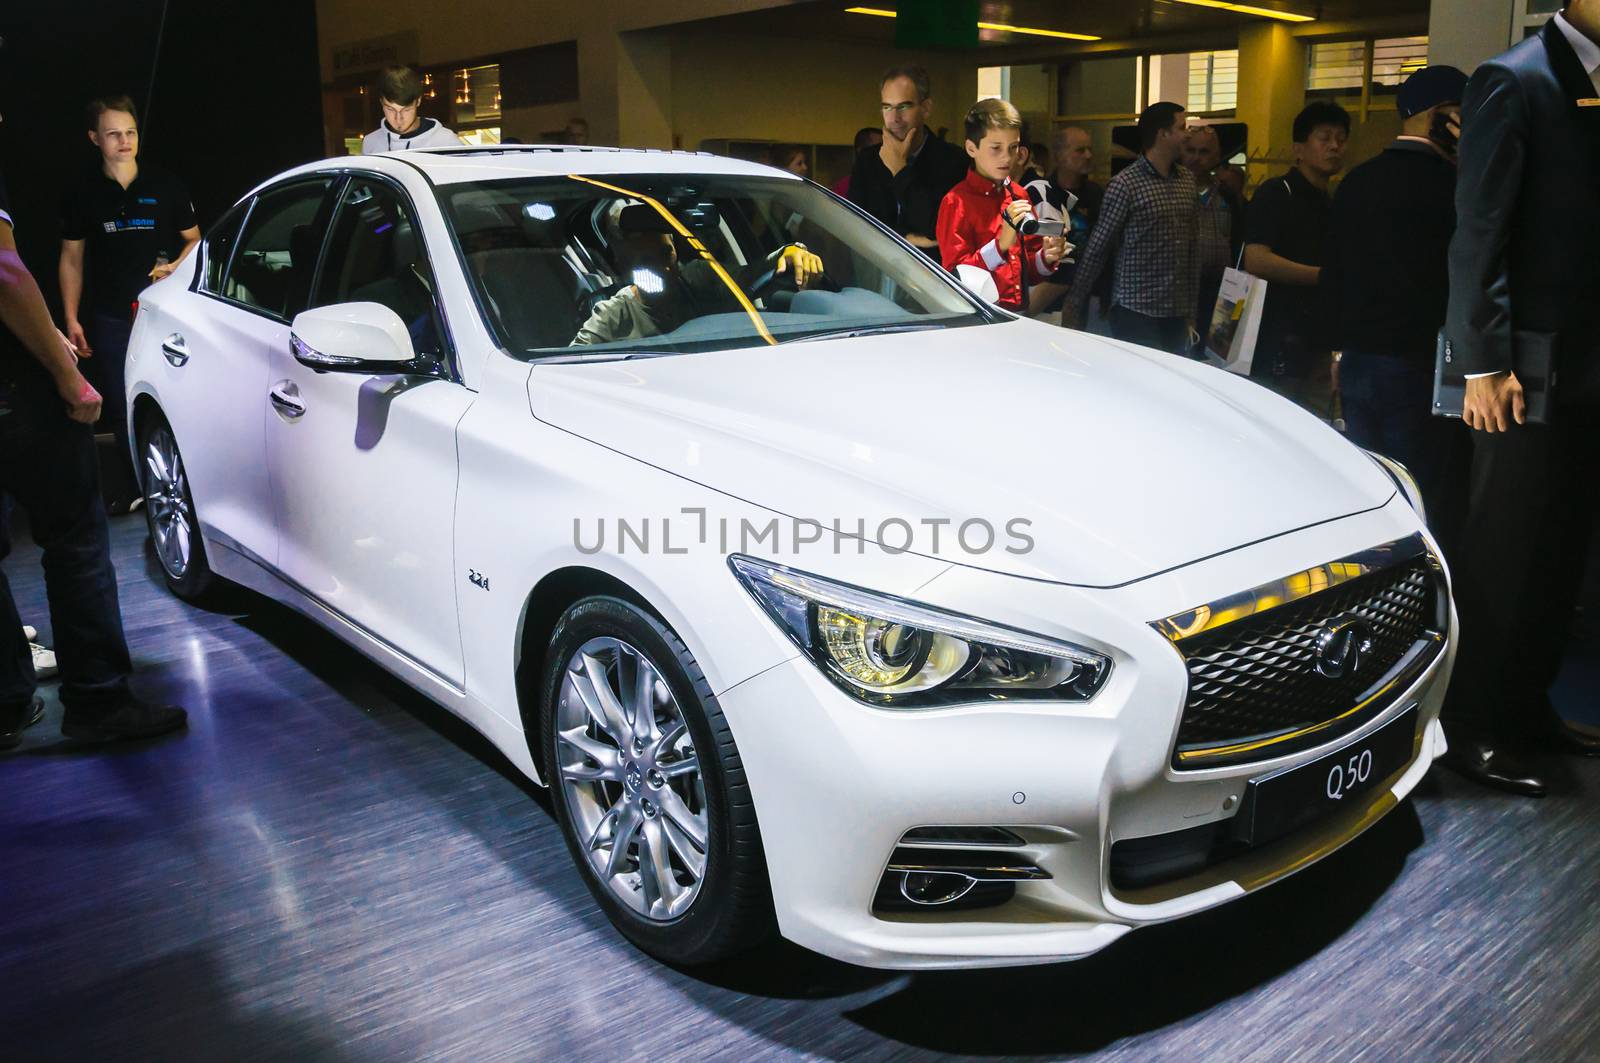 FRANKFURT - SEPT 21: INIFINITY Q50 presented as world premiere at the 65th IAA (Internationale Automobil Ausstellung) on September 21, 2013 in Frankfurt, Germany